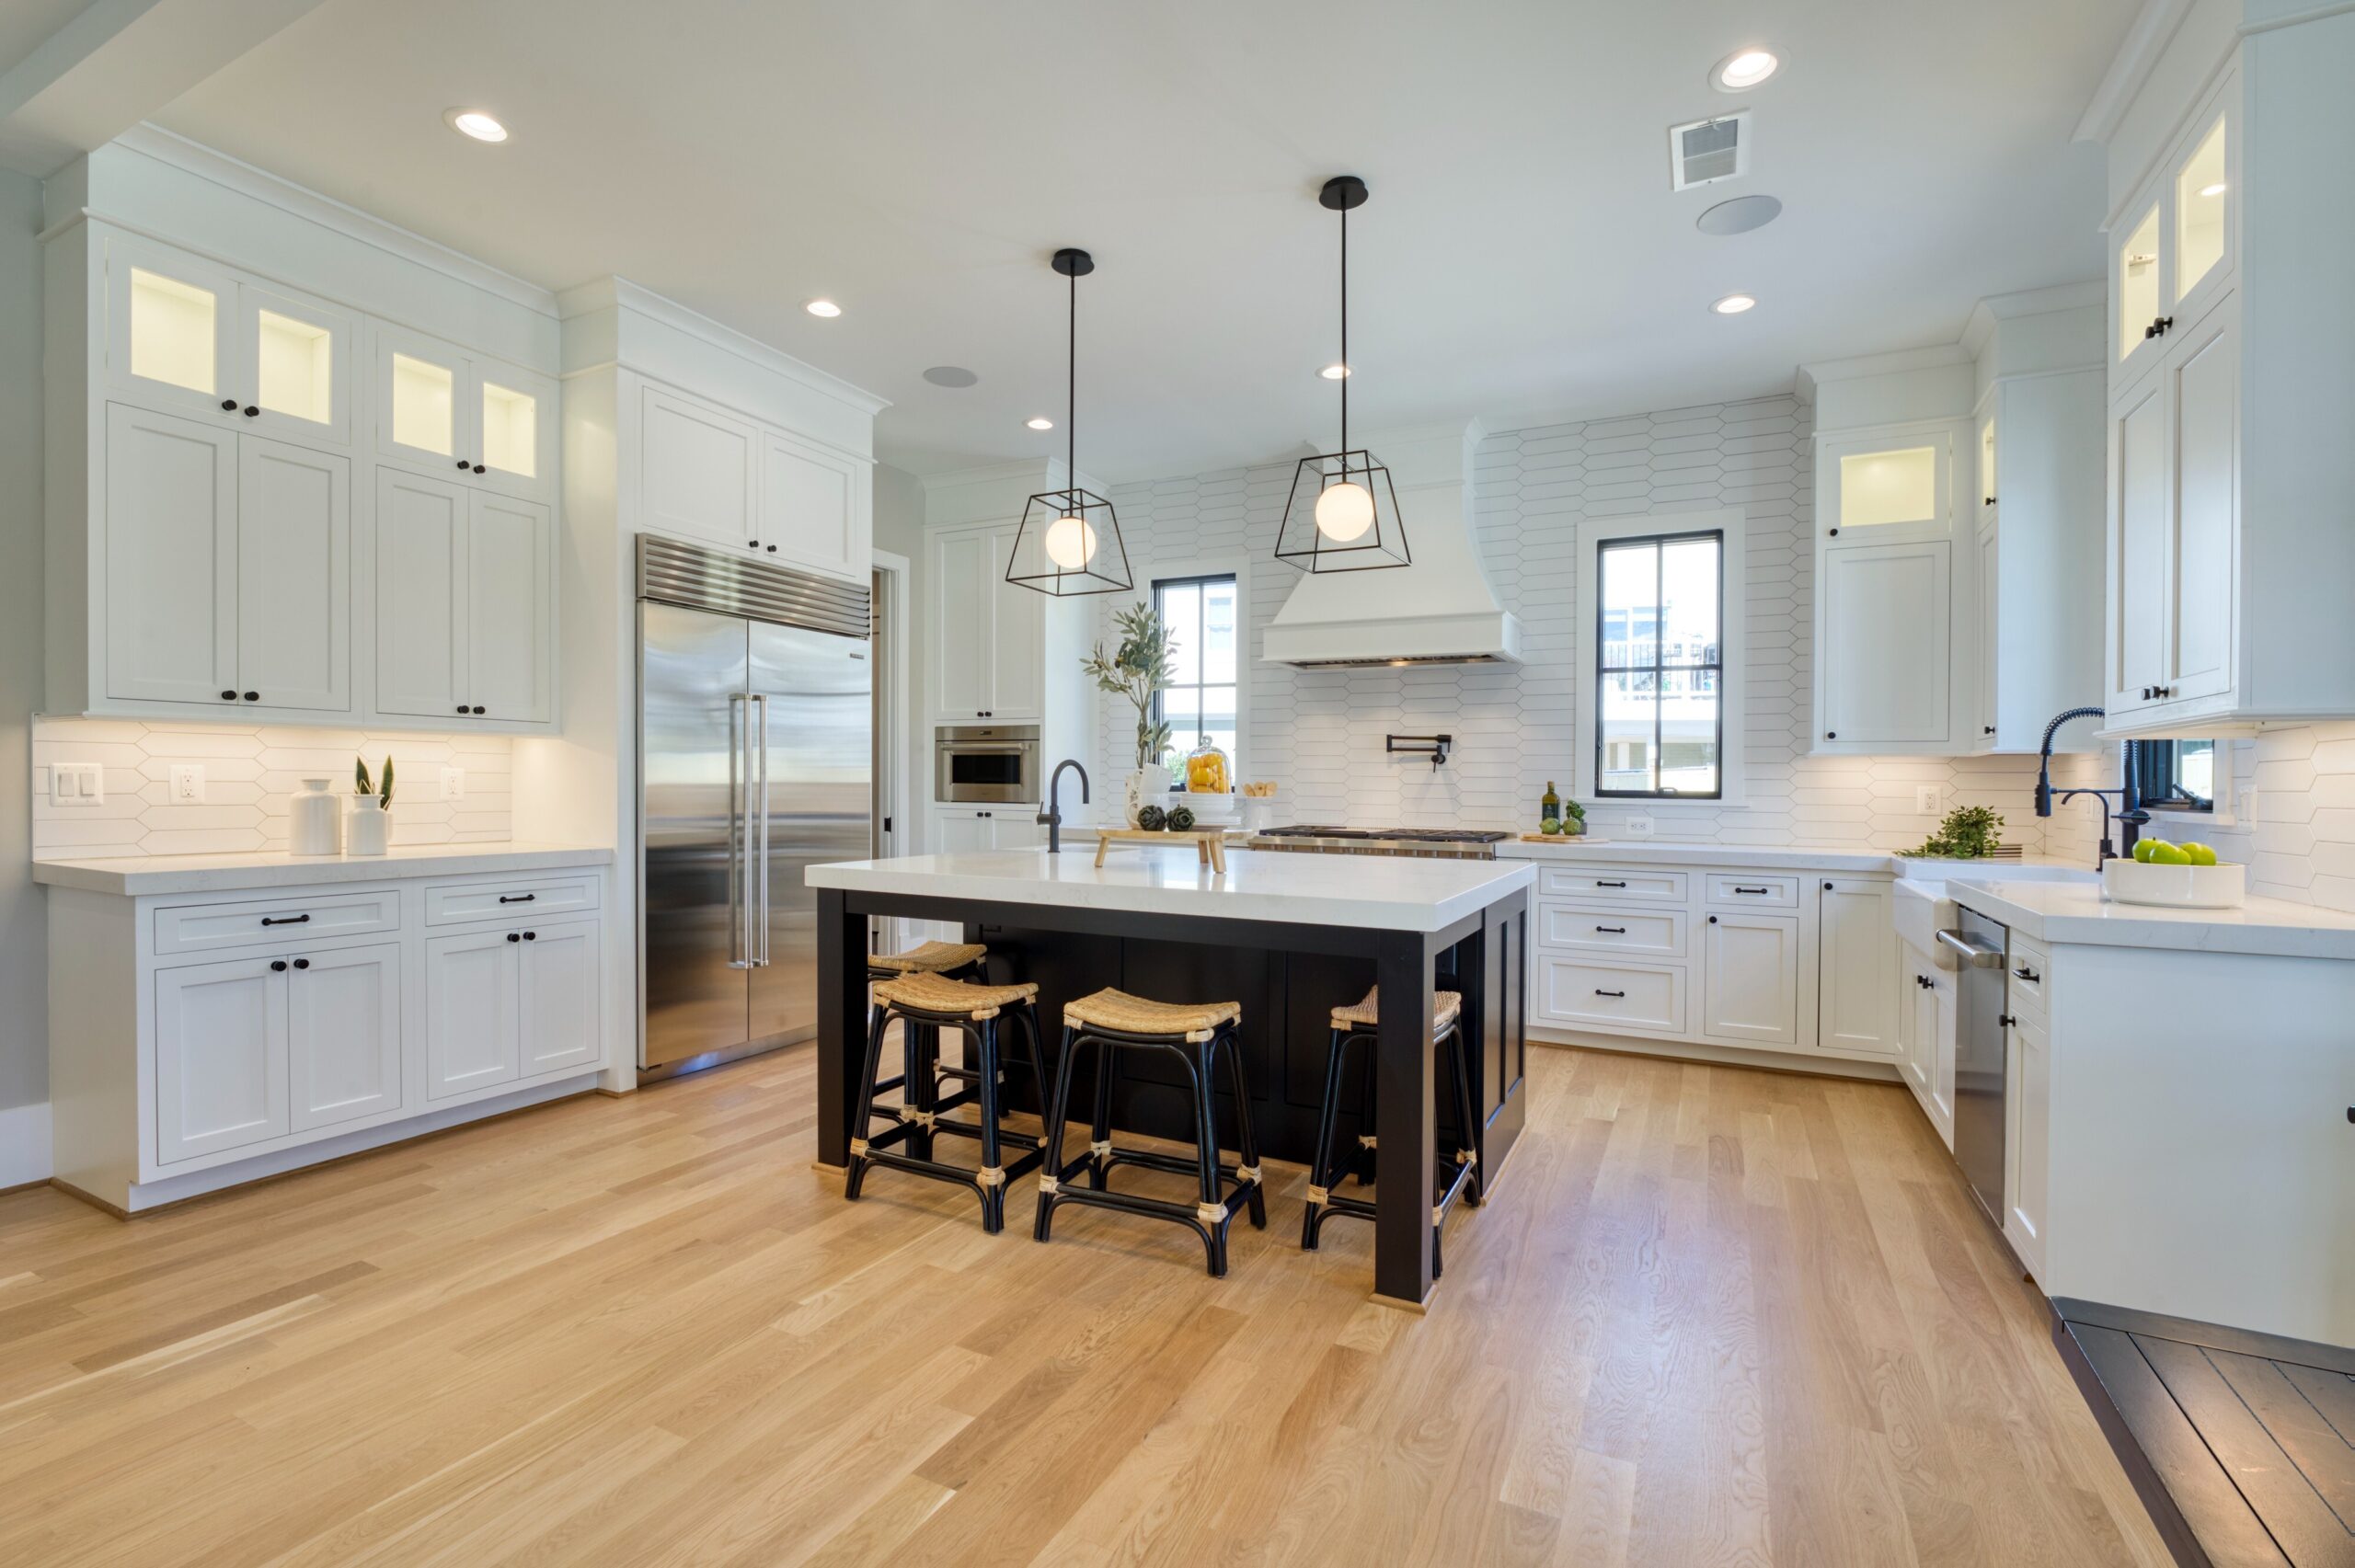 Professional interior photo of 1624 Dempsey St, McLean, VA - showing the white kitchen with large island and quartz countertops